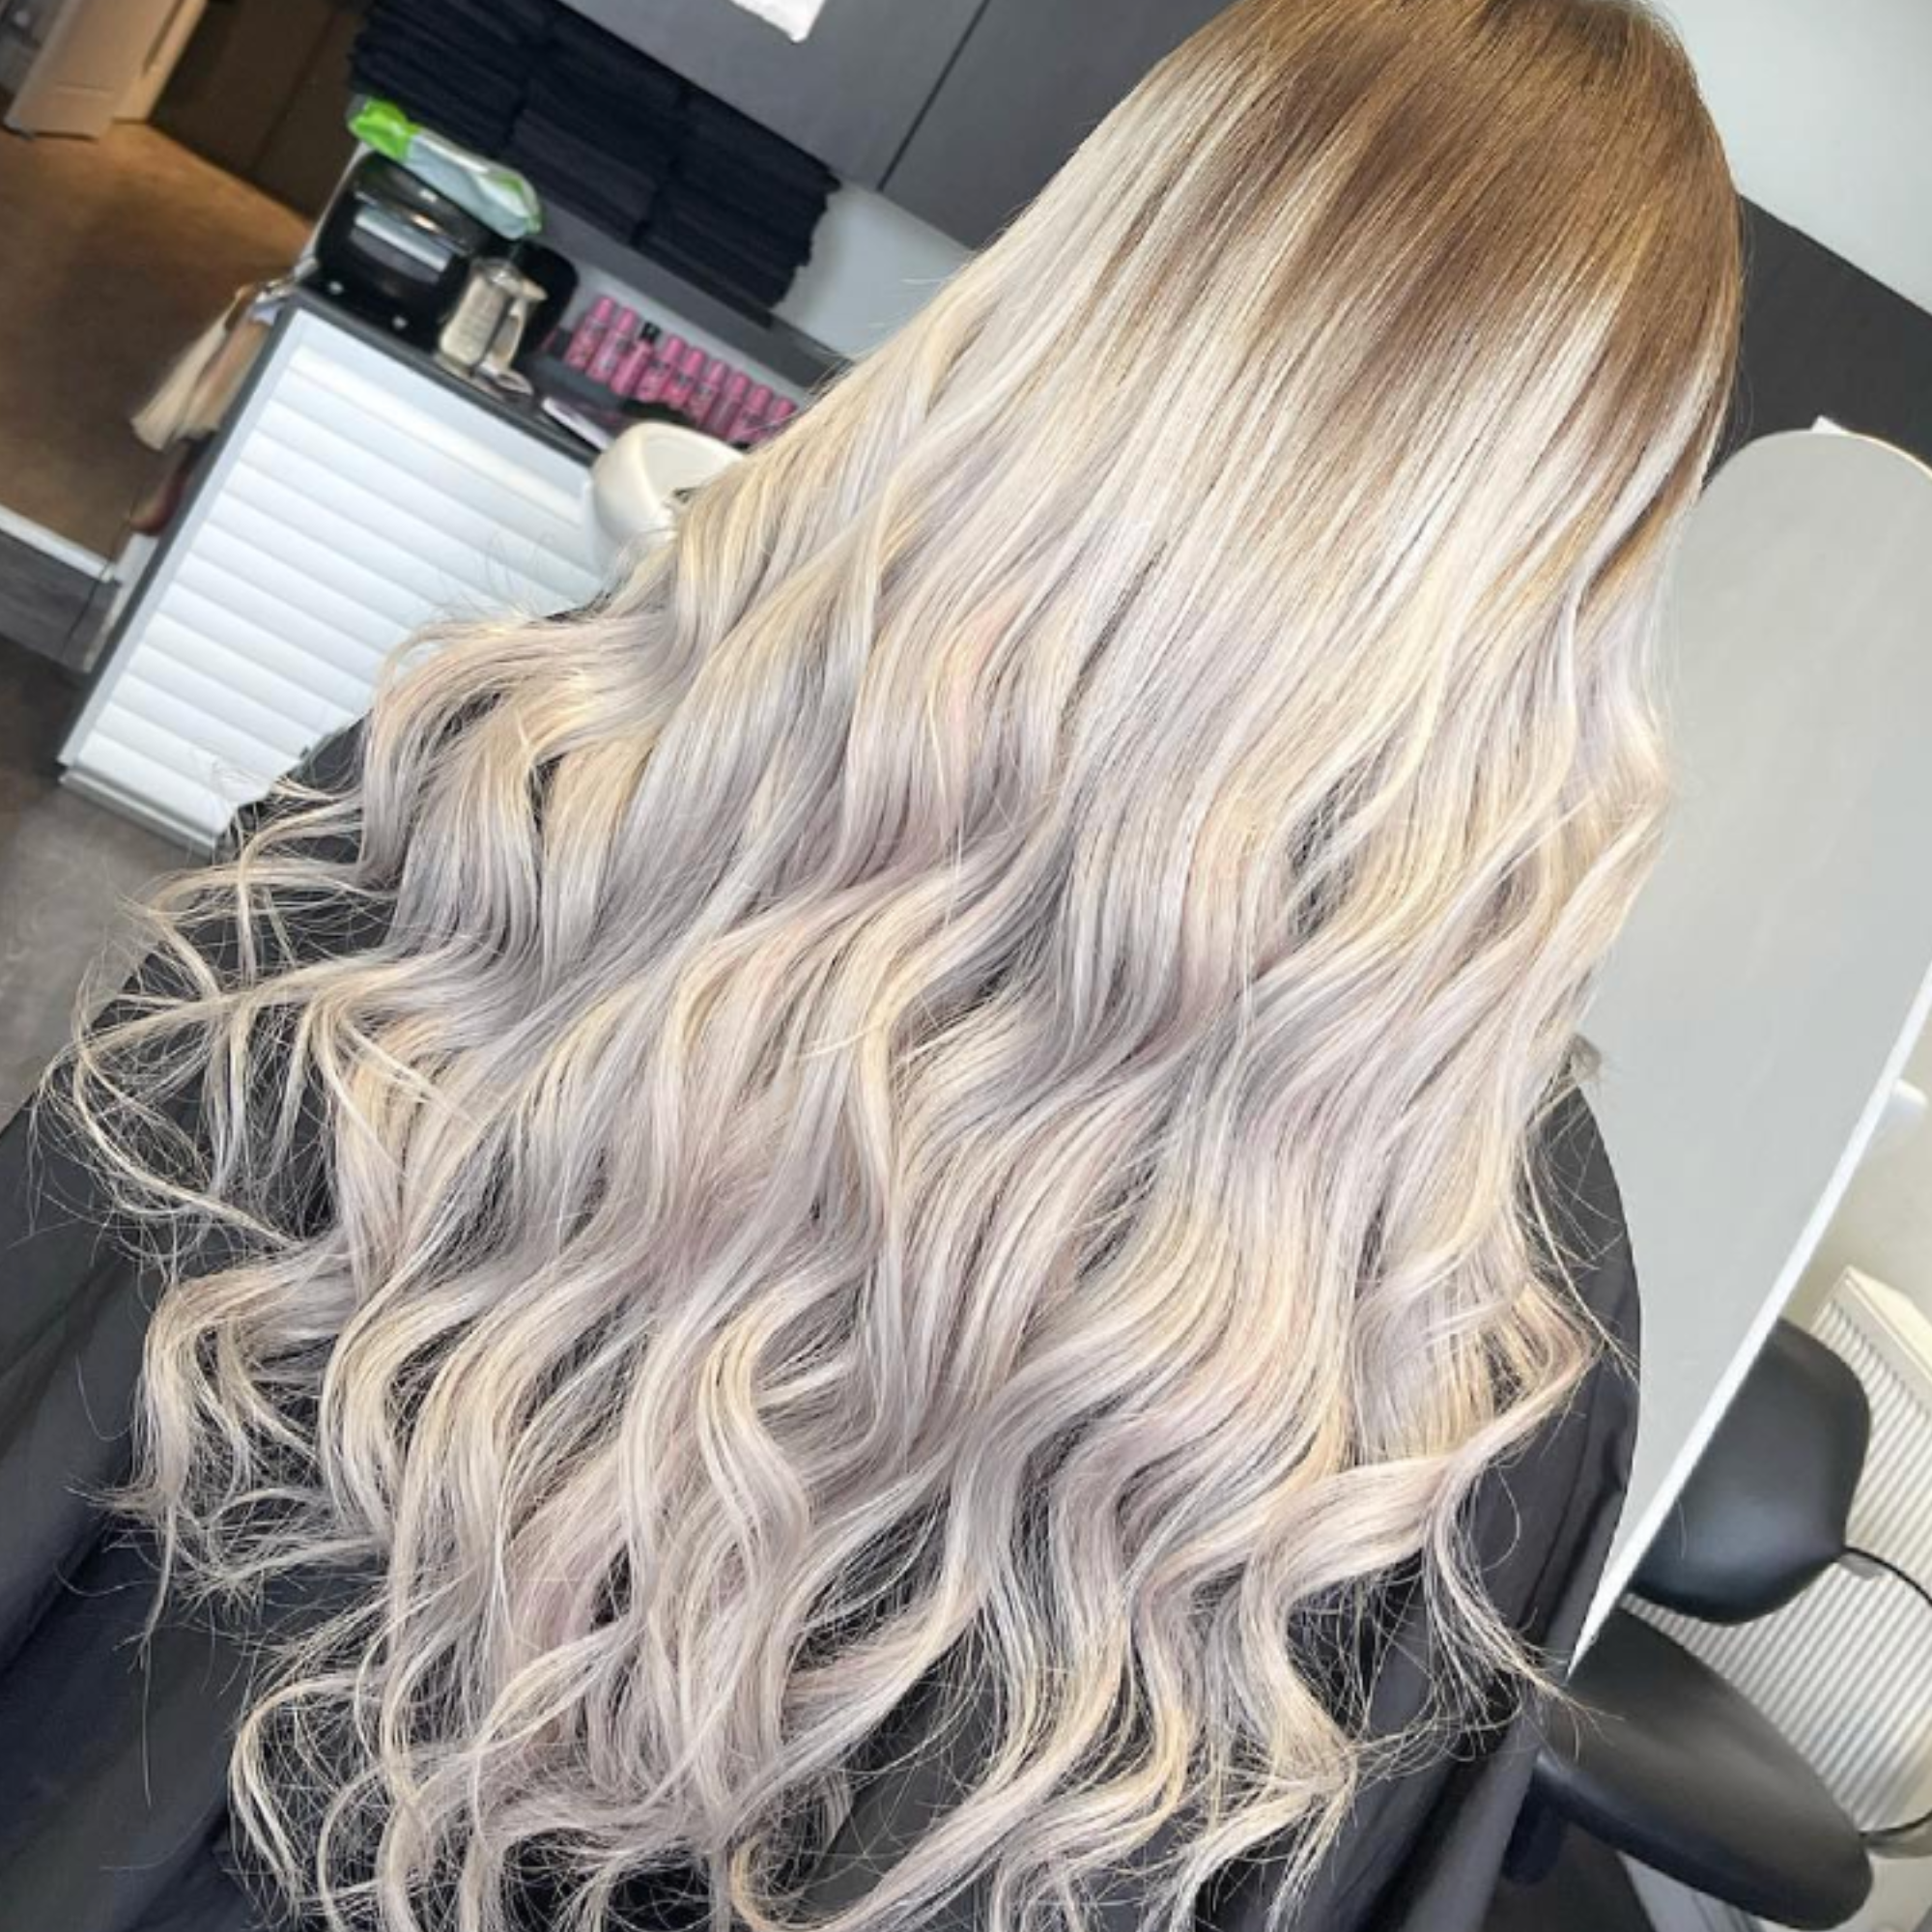 "hair rehab london 22" weft hair extensions shade swatch titled rooted blonde af"